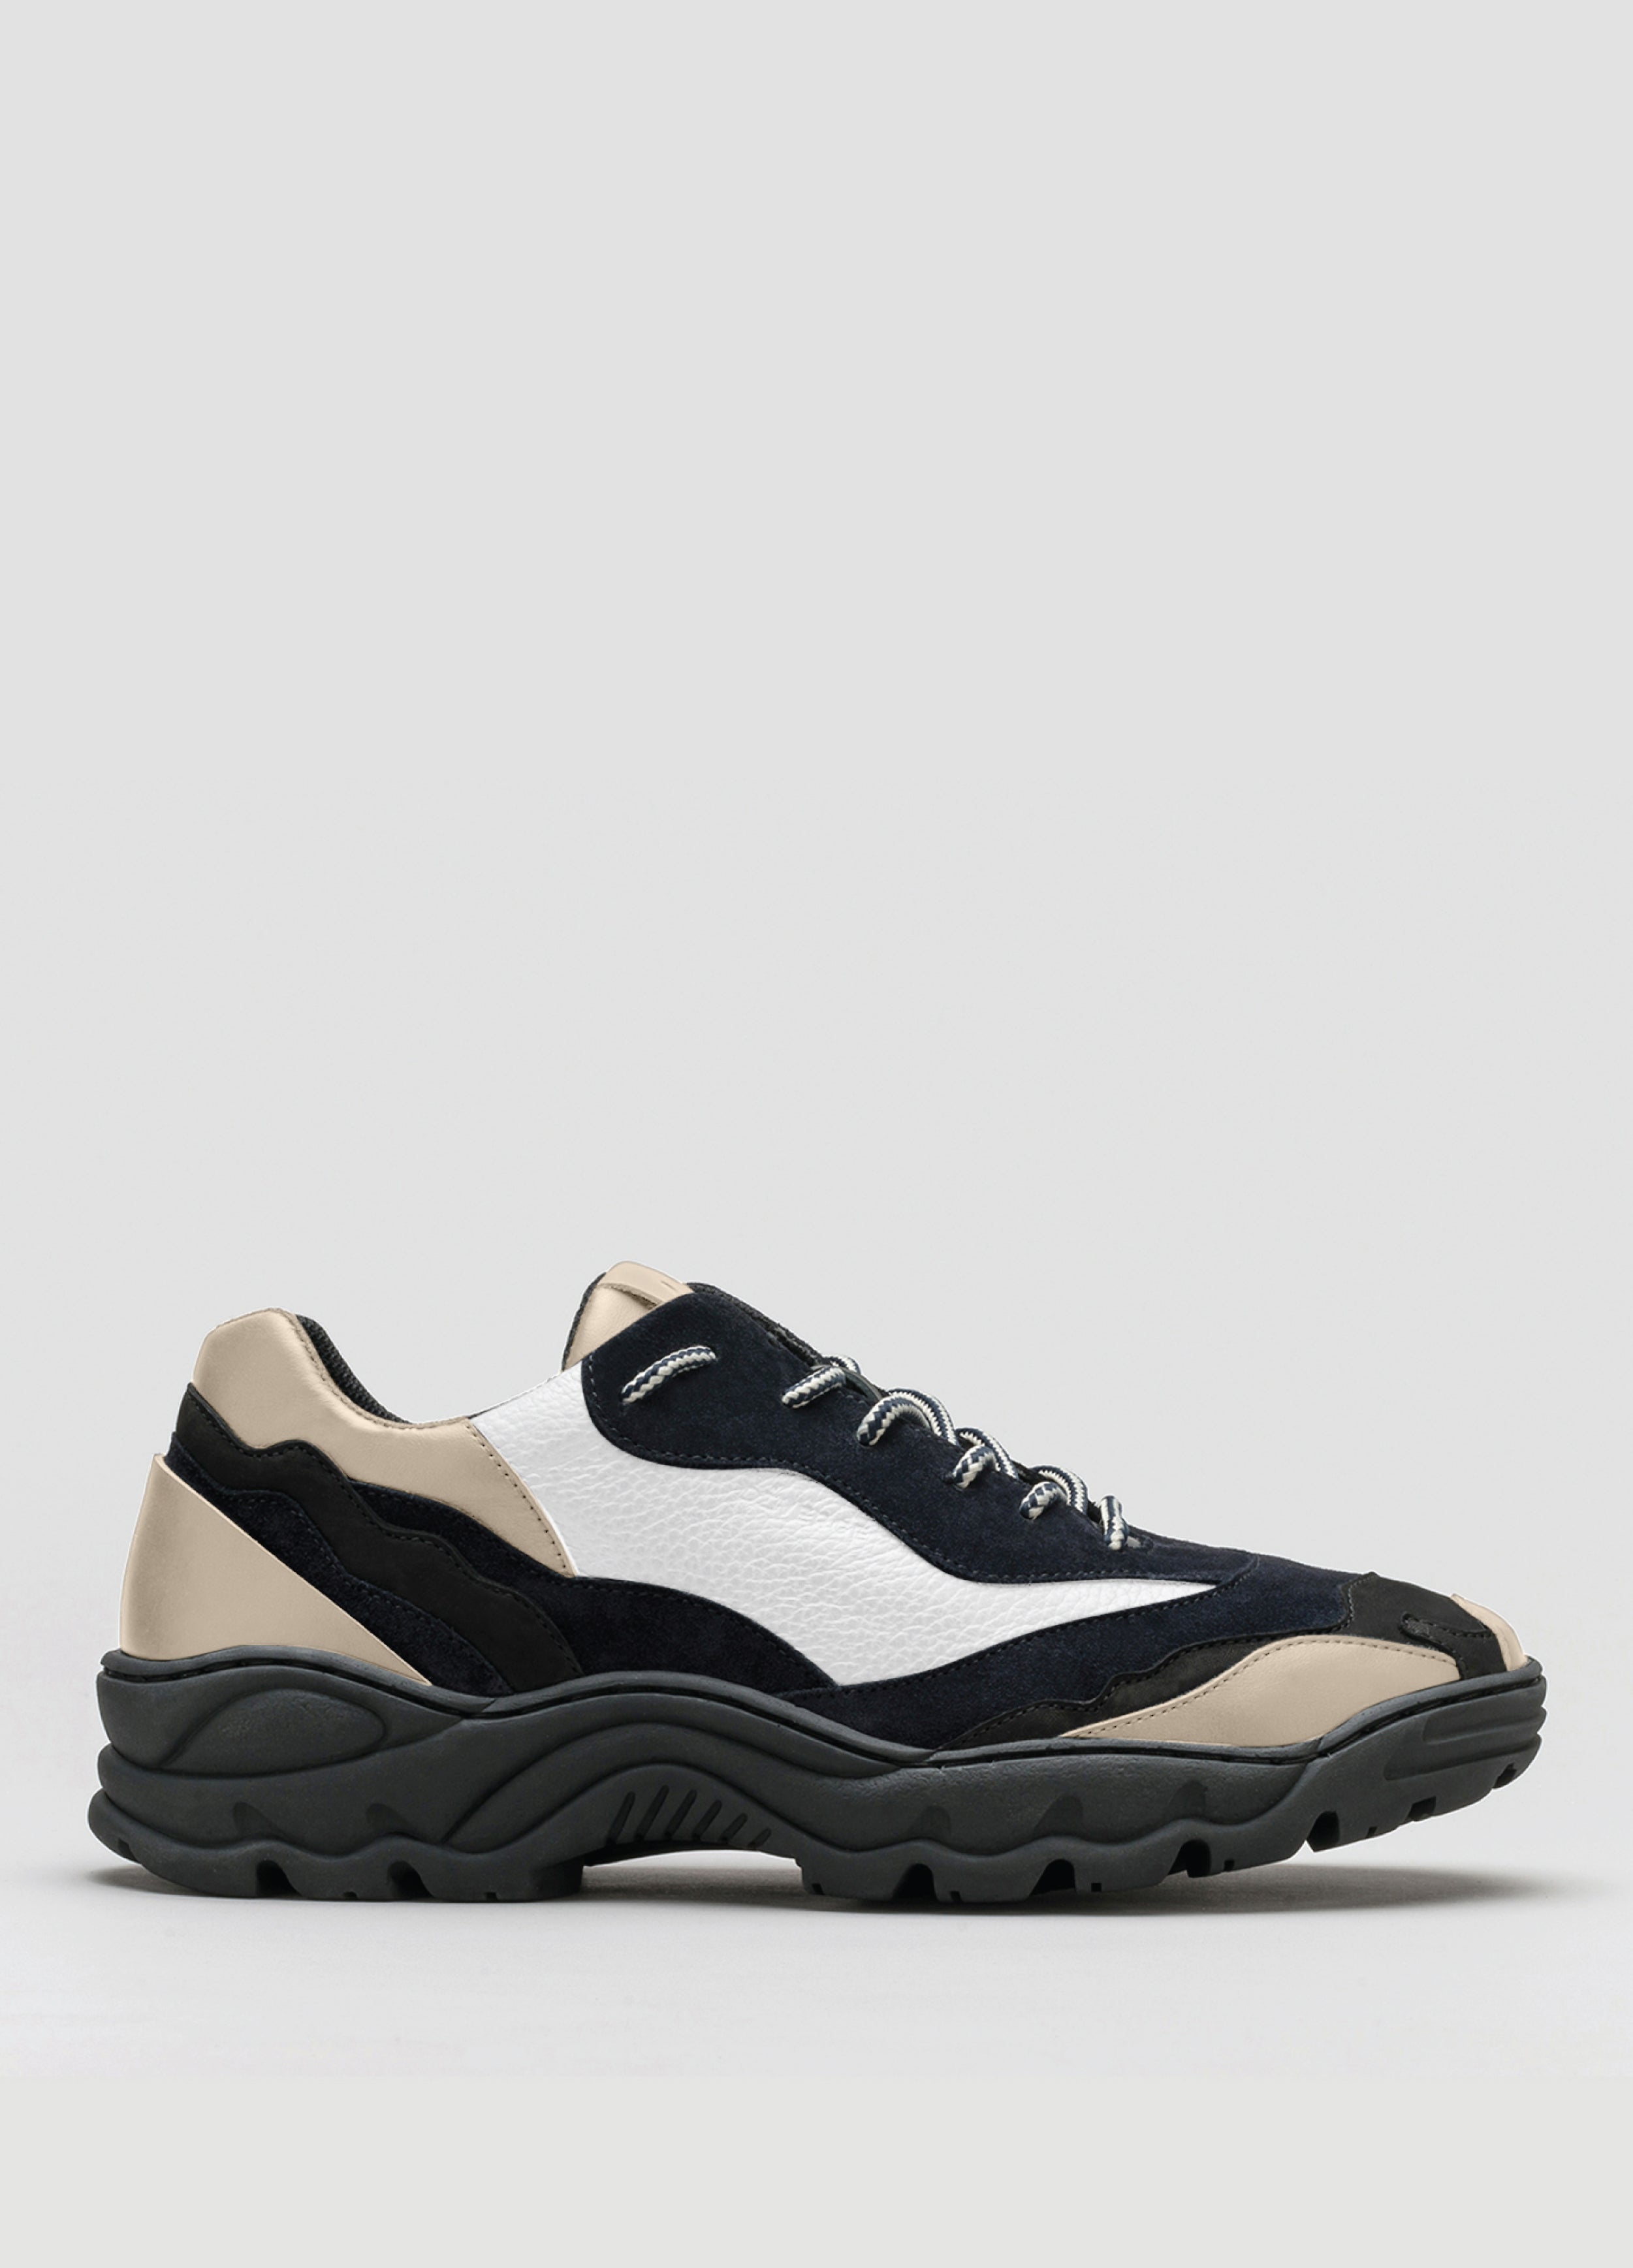 color mix black, beige & white premium leather sneakers landscape with sophisticated silhouette sideview